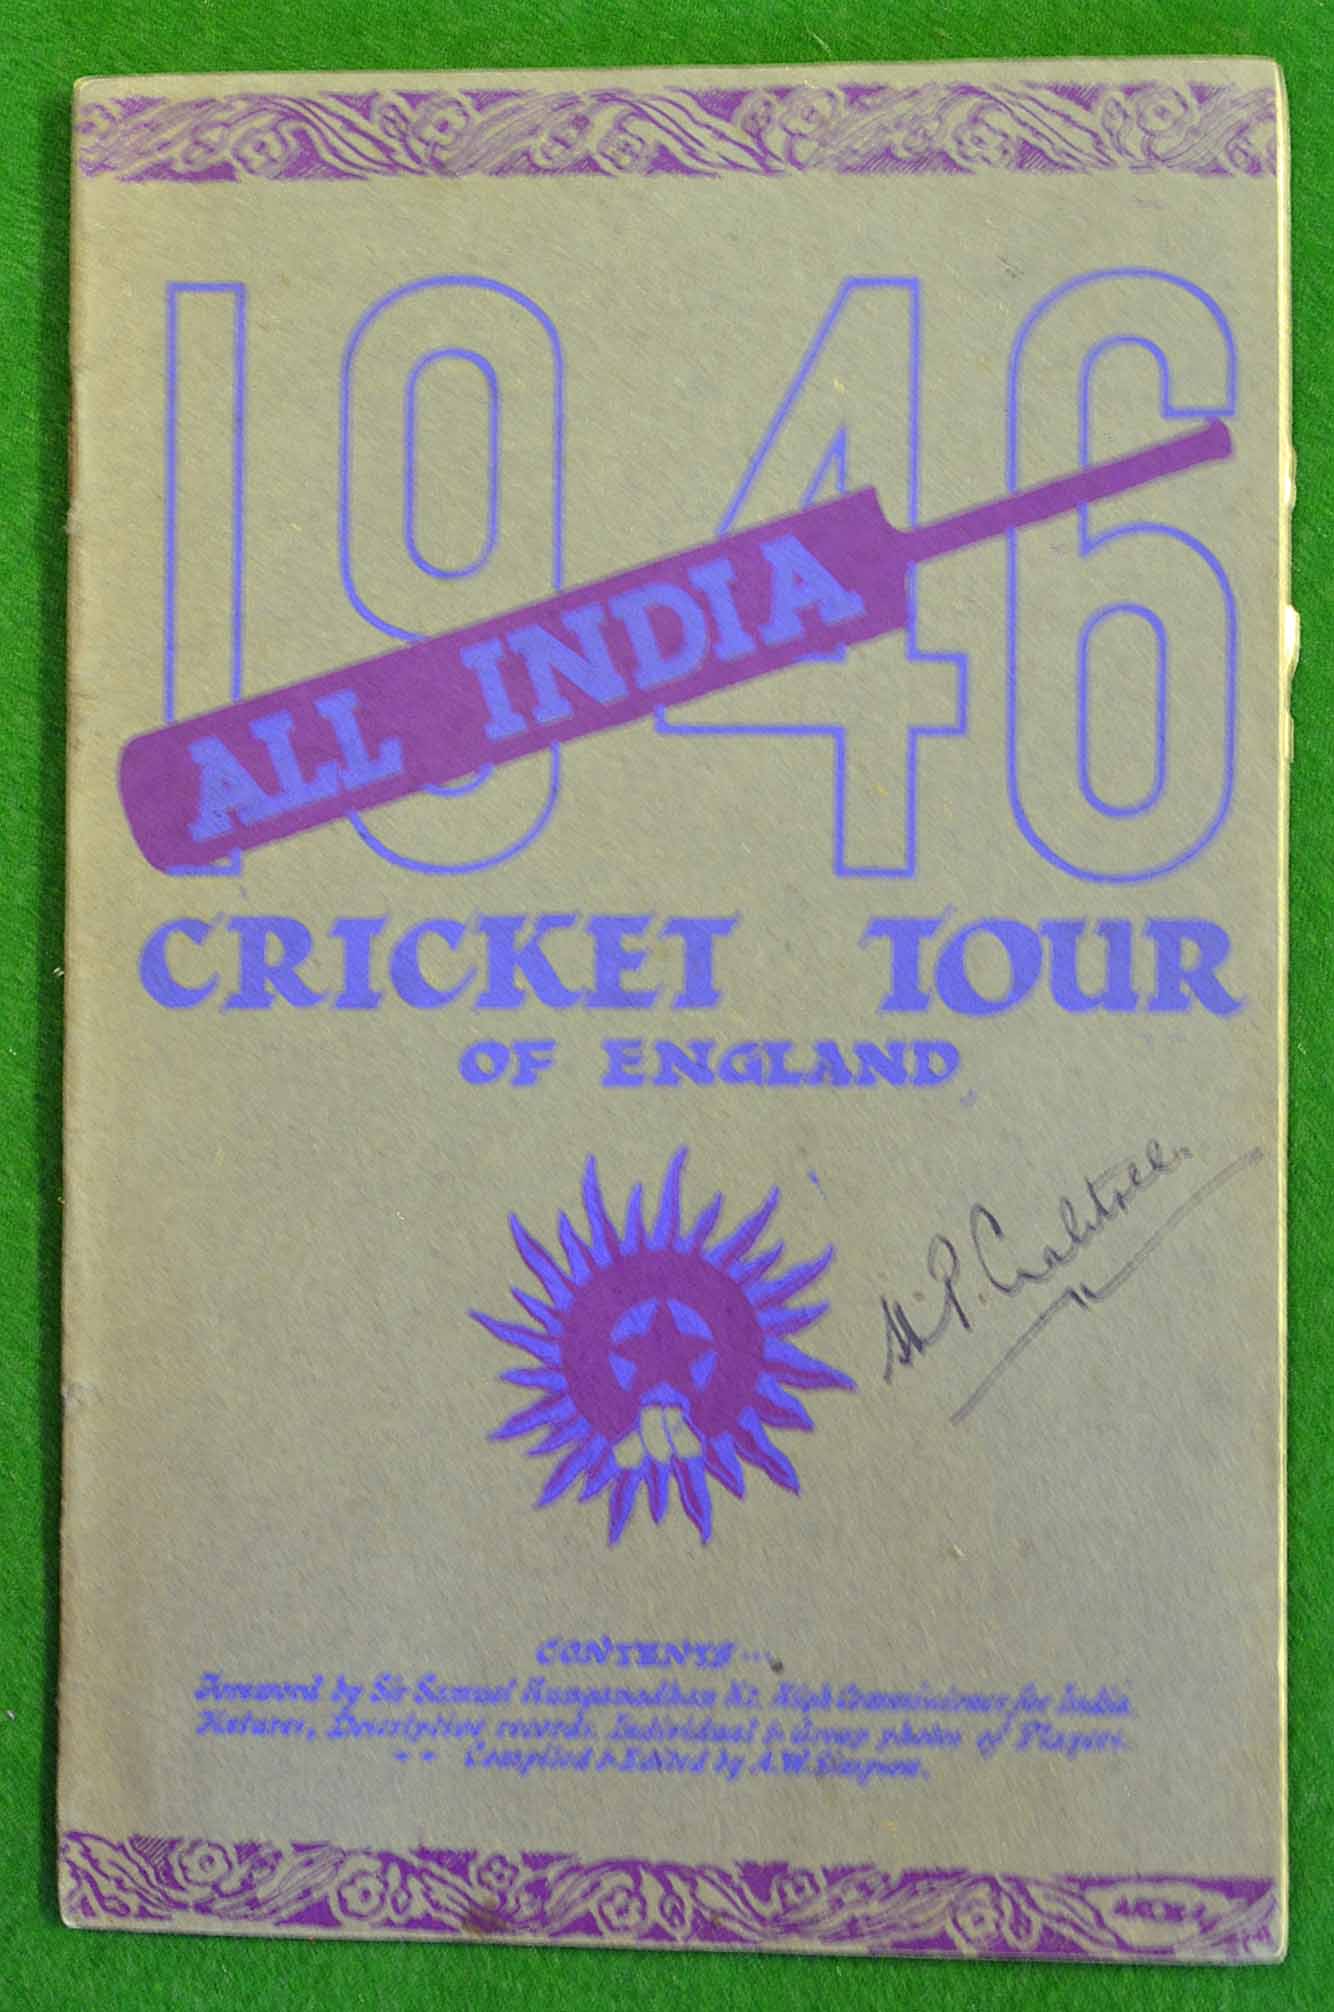 1946 All India Cricket Tour of England Signed Programme: 32 Page Illustrated programme having